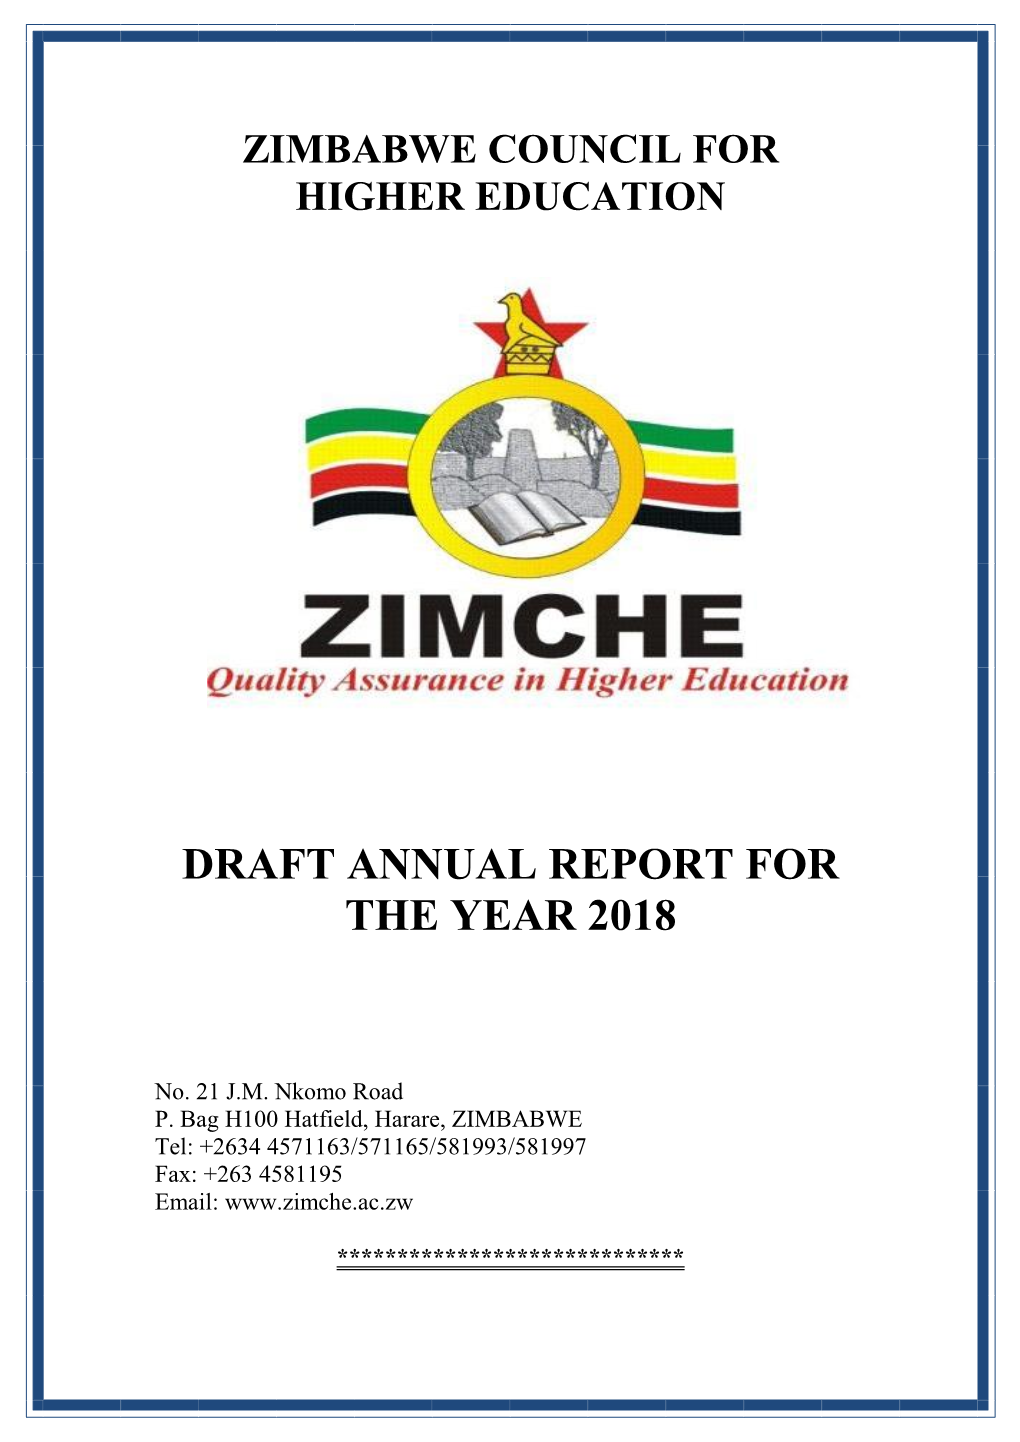 Draft Annual Report for the Year 2018